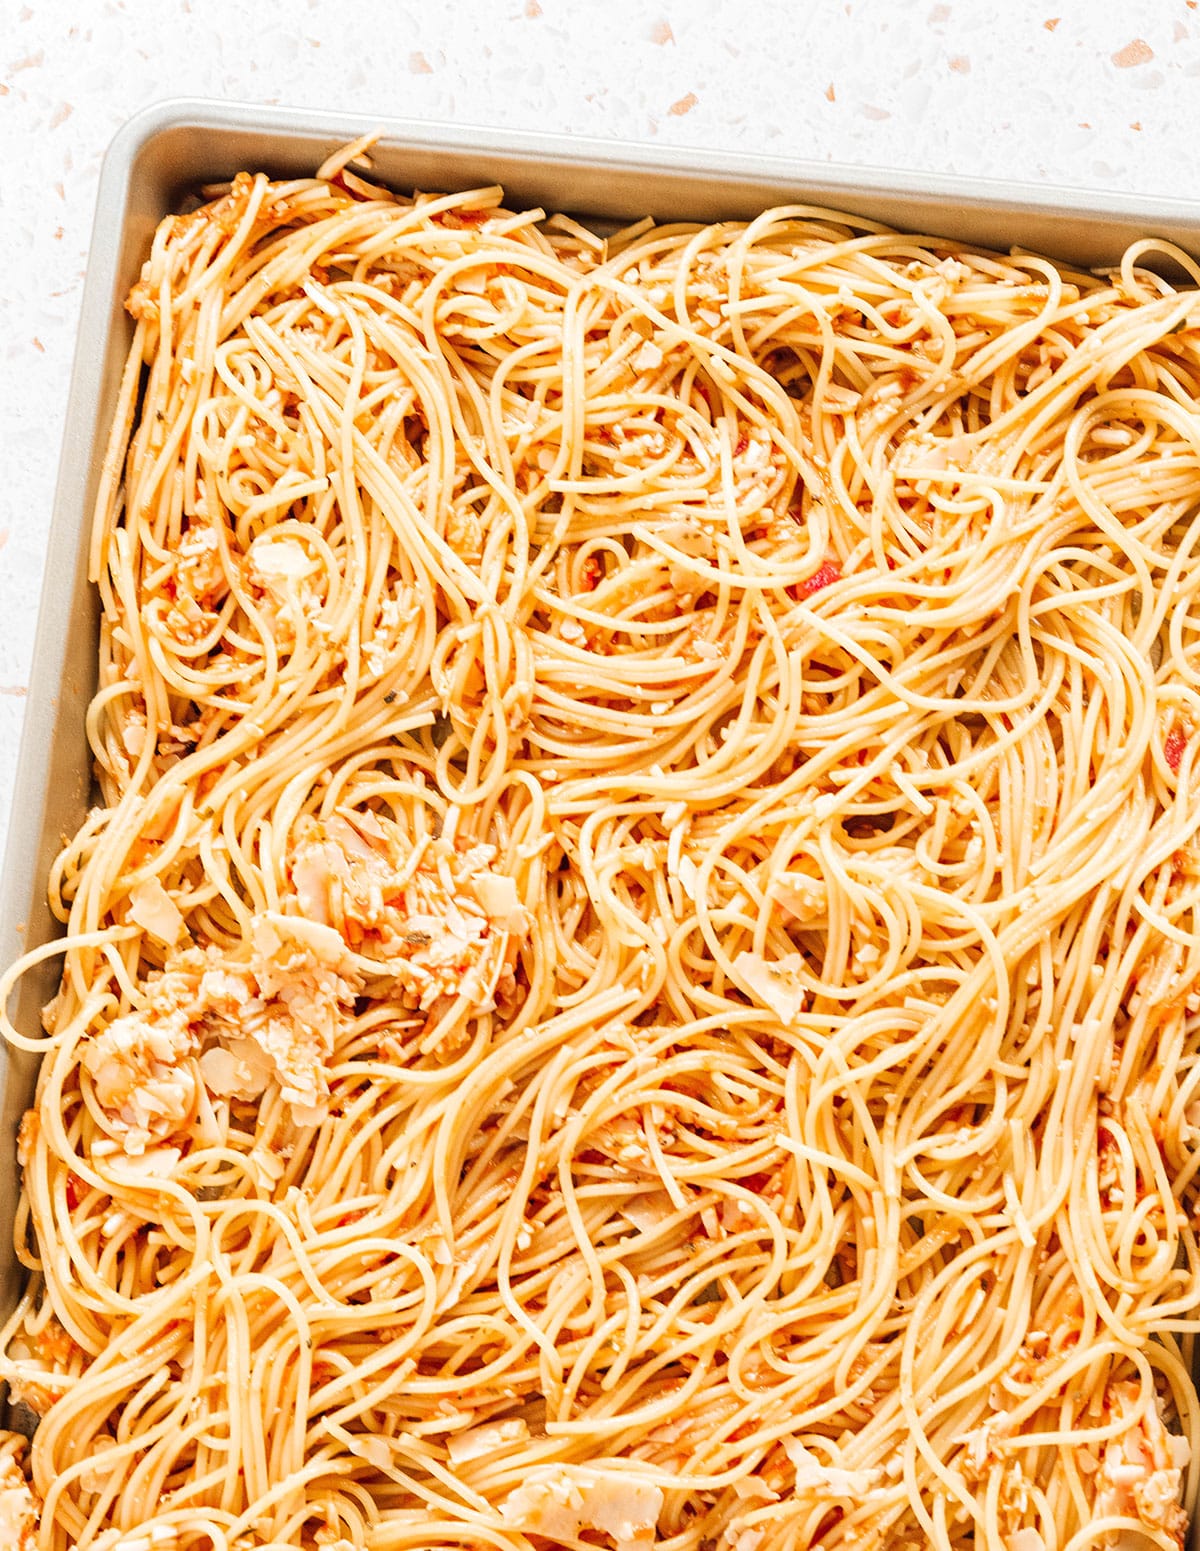 Sauce and cheese coated spaghetti spread in a baking dish.